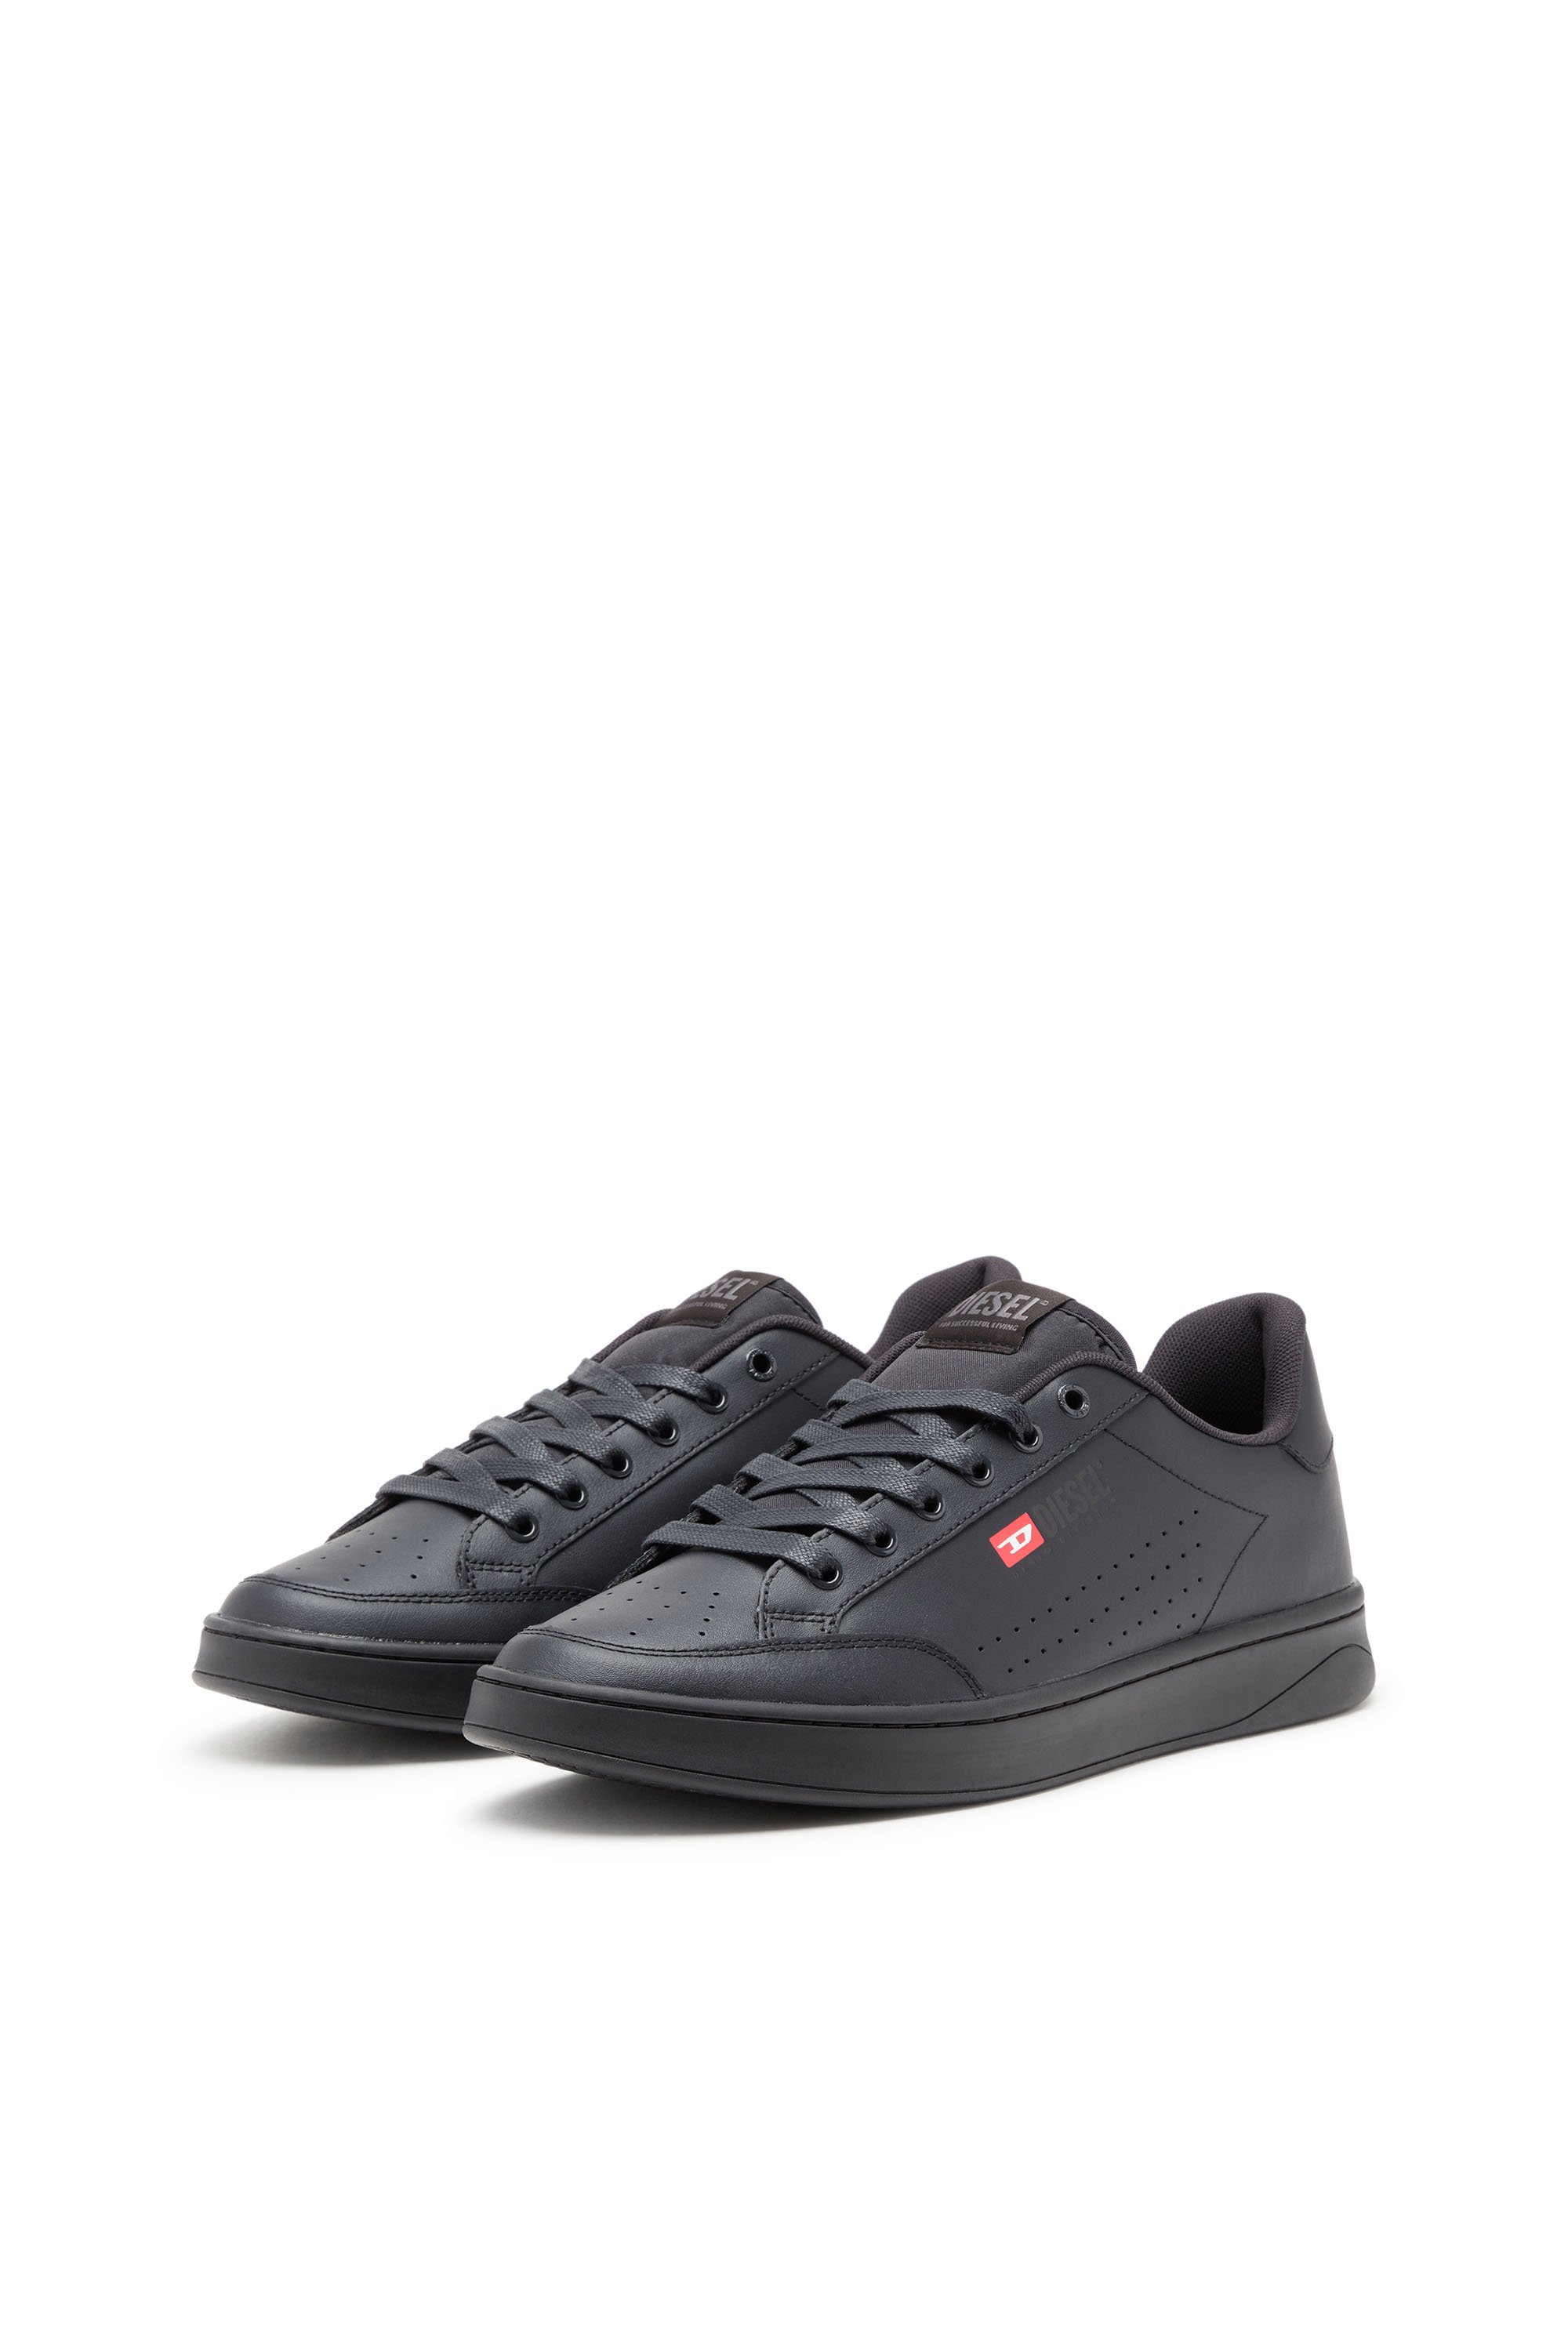 Diesel - S-ATHENE VTG, Man S-Athene-Low-top sneakers in leather and nylon in Black - Image 8